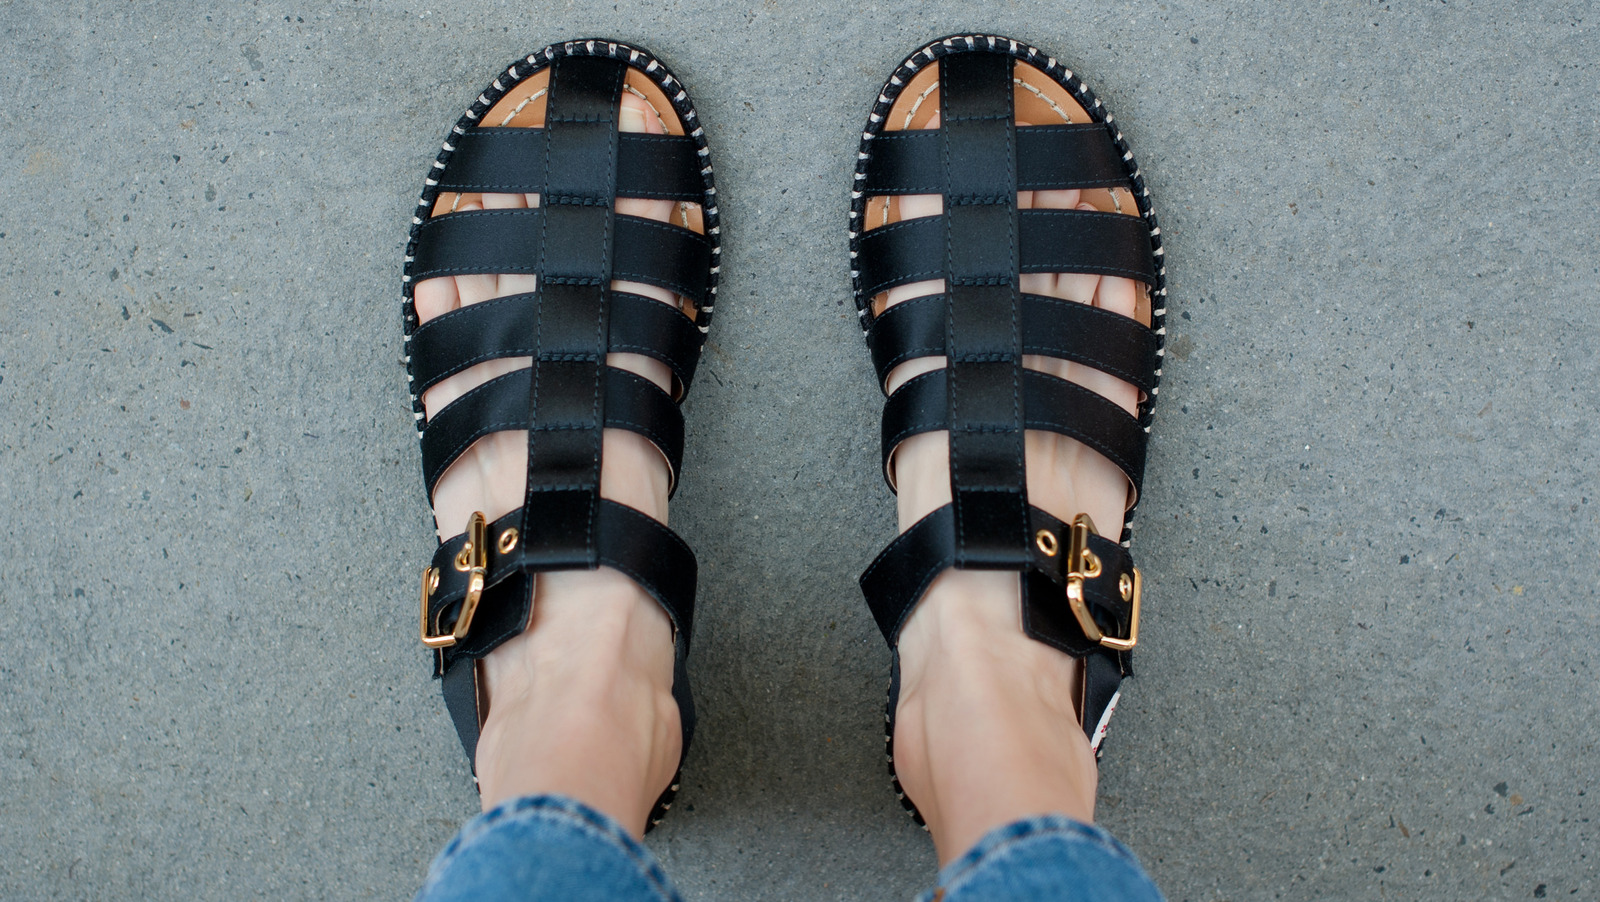 Fisherman Sandals Are Chic, Yet Practical - Here's How To Style